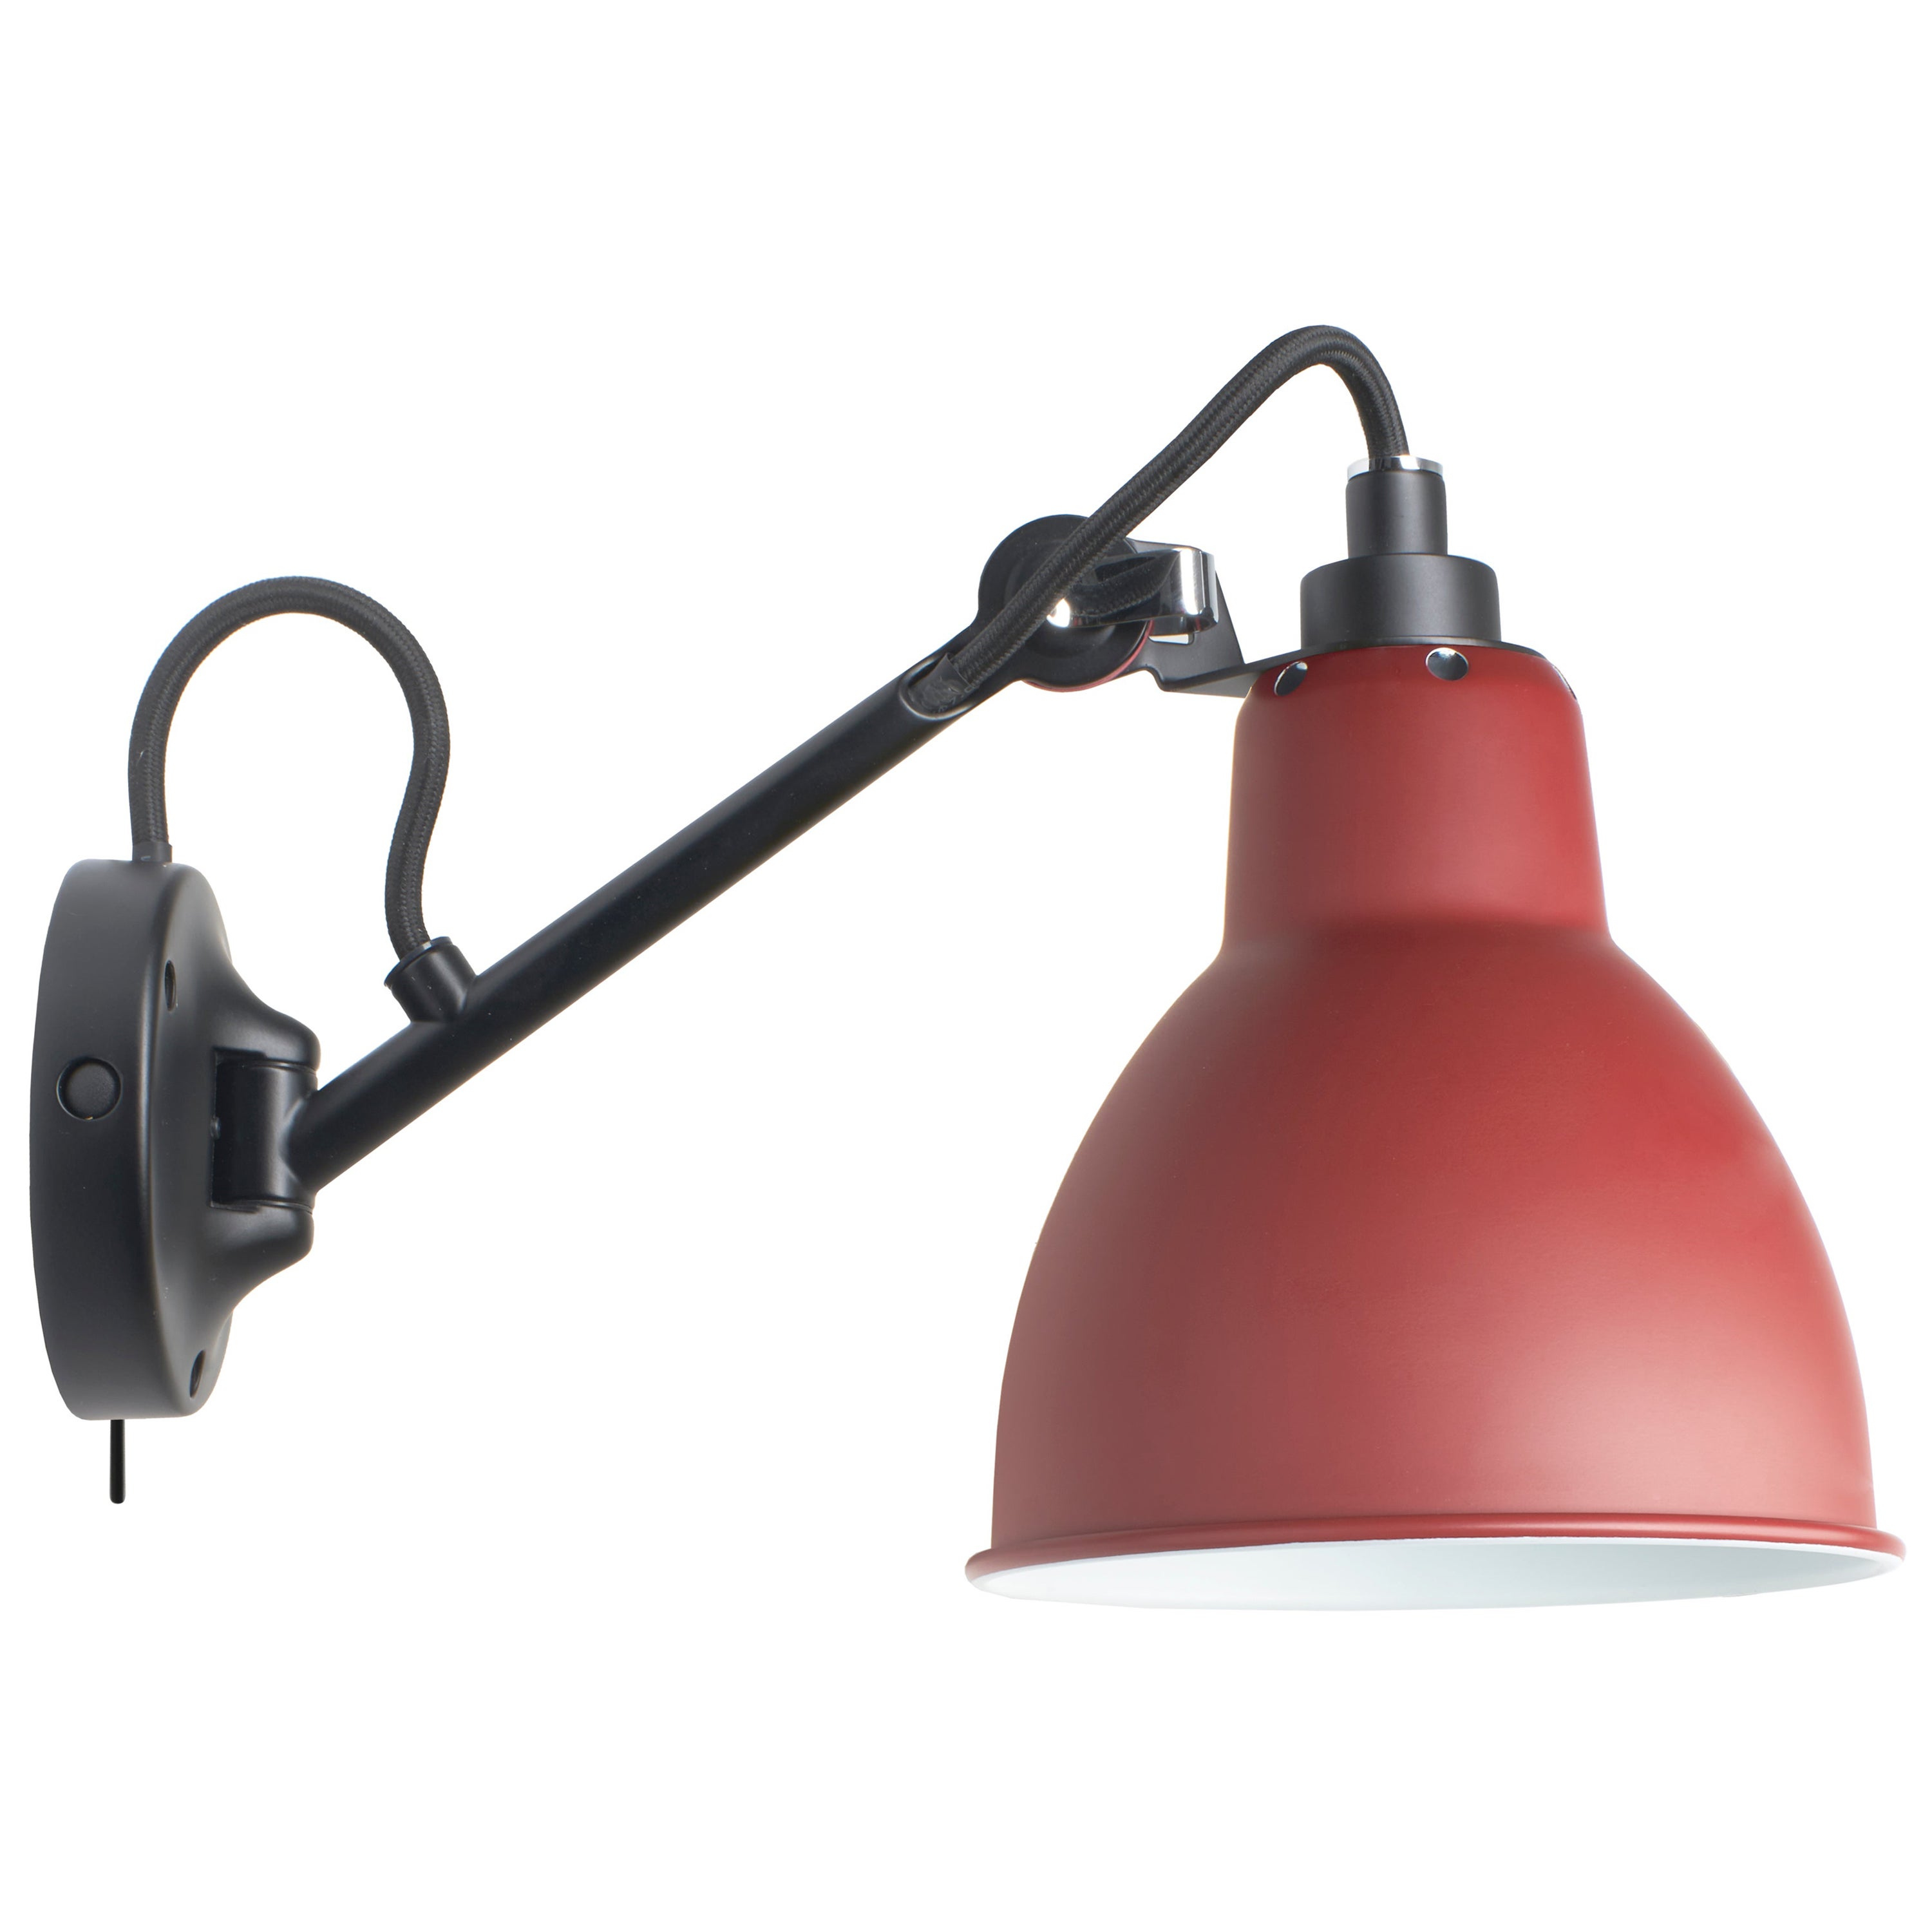 DCW Editions La Lampe Gras N°104 SW Wall Lamp in Black Arm and Red Shade For Sale